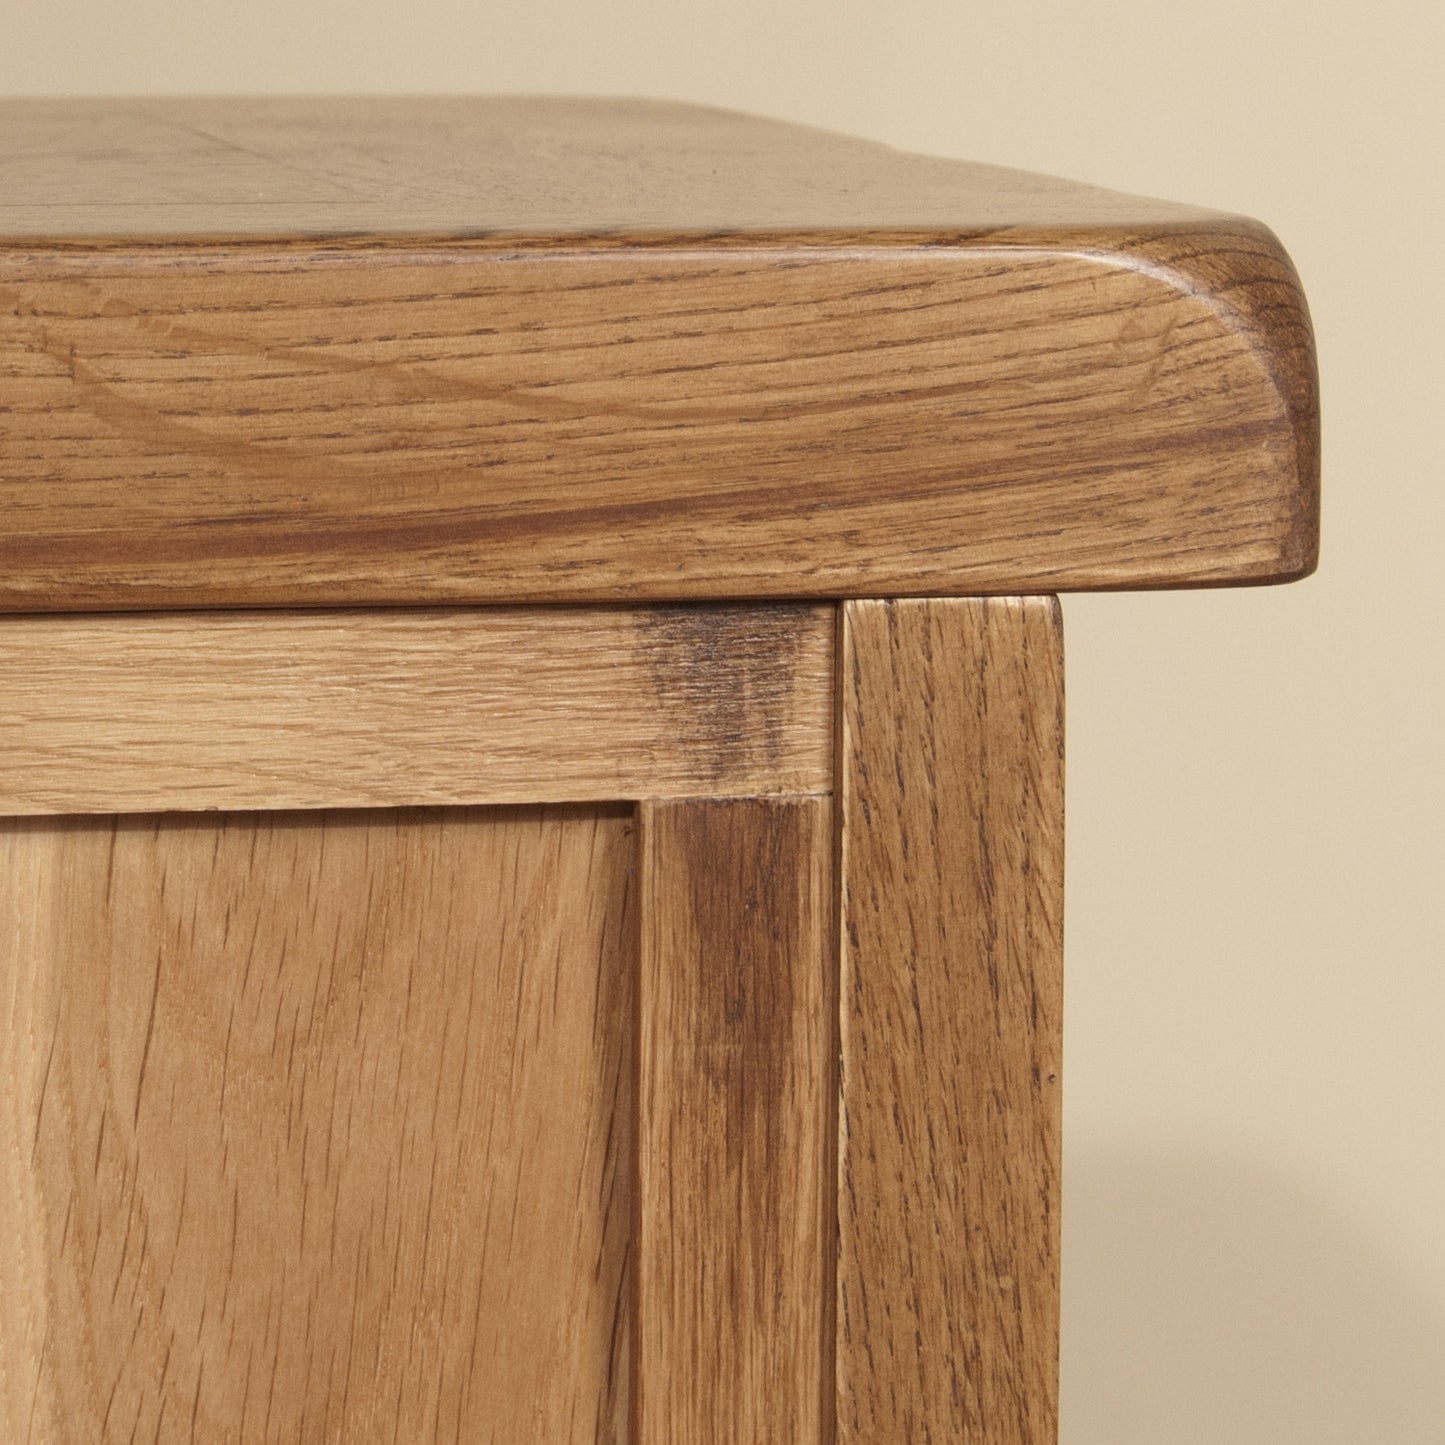 Auvergne Solid Oak Console Table - 2 Drawer